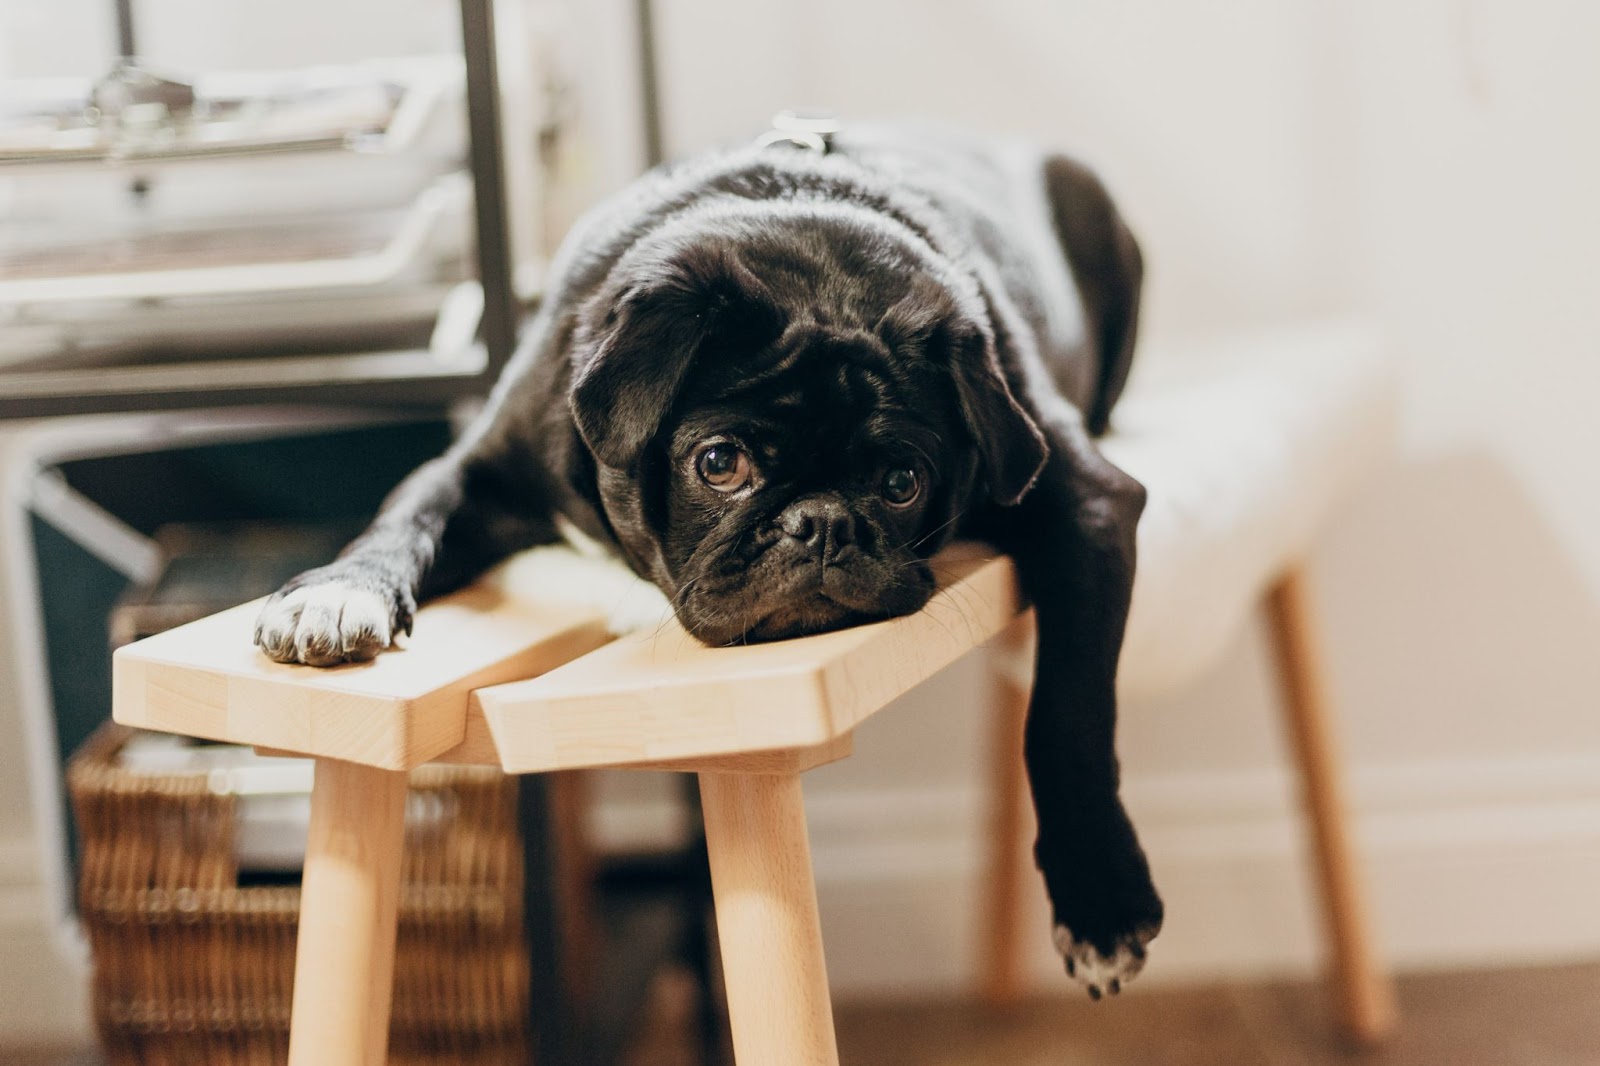 A picture of a black pug laying on a bench, looking very bored.